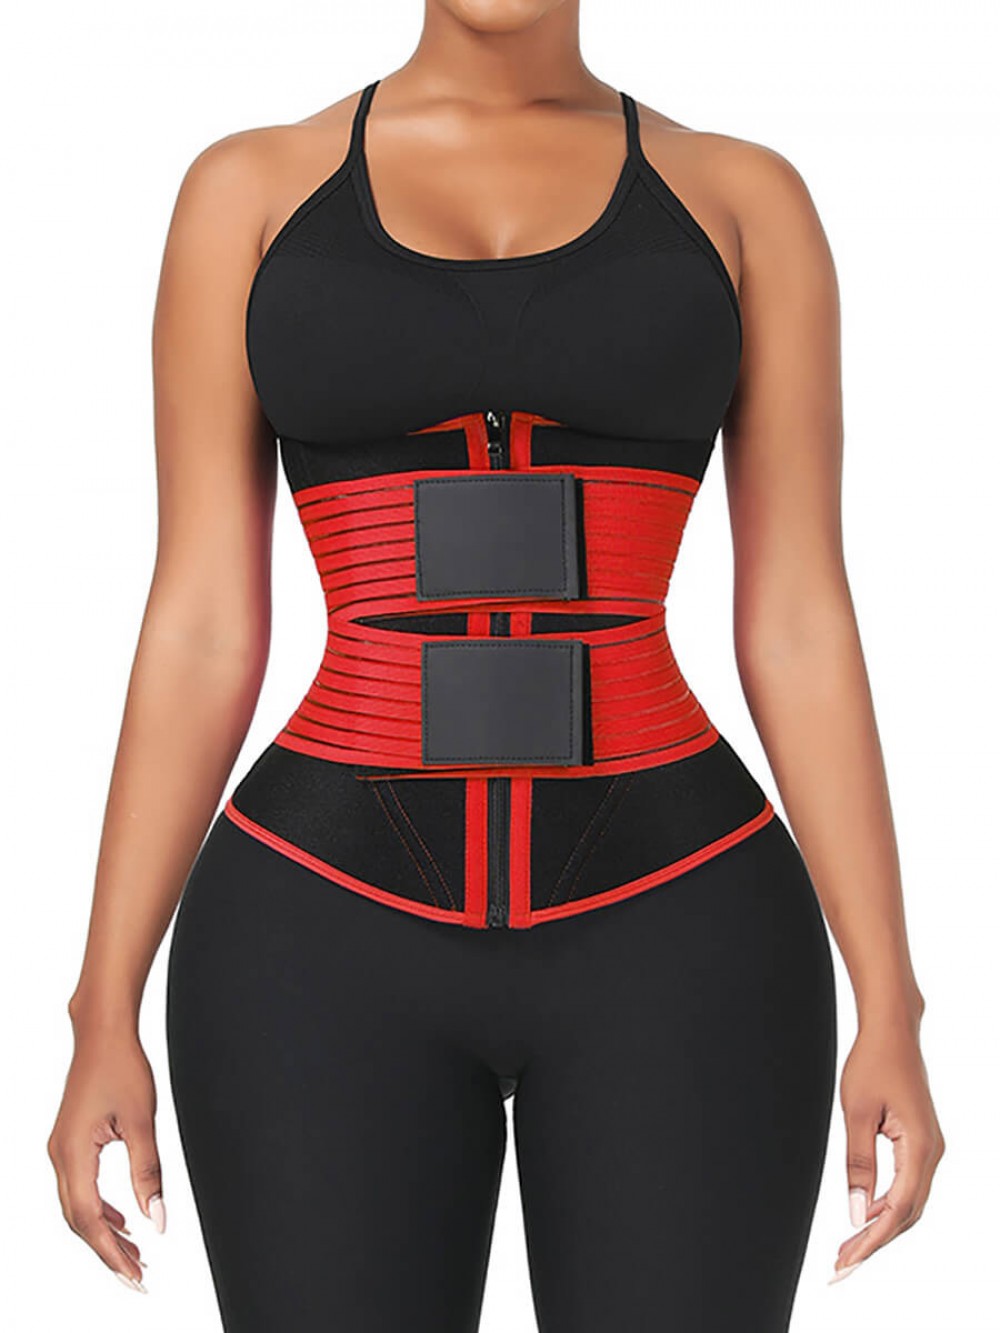 Red Neoprene 3-Layer Tummy Wrap With 10 Steel Bones For Workout